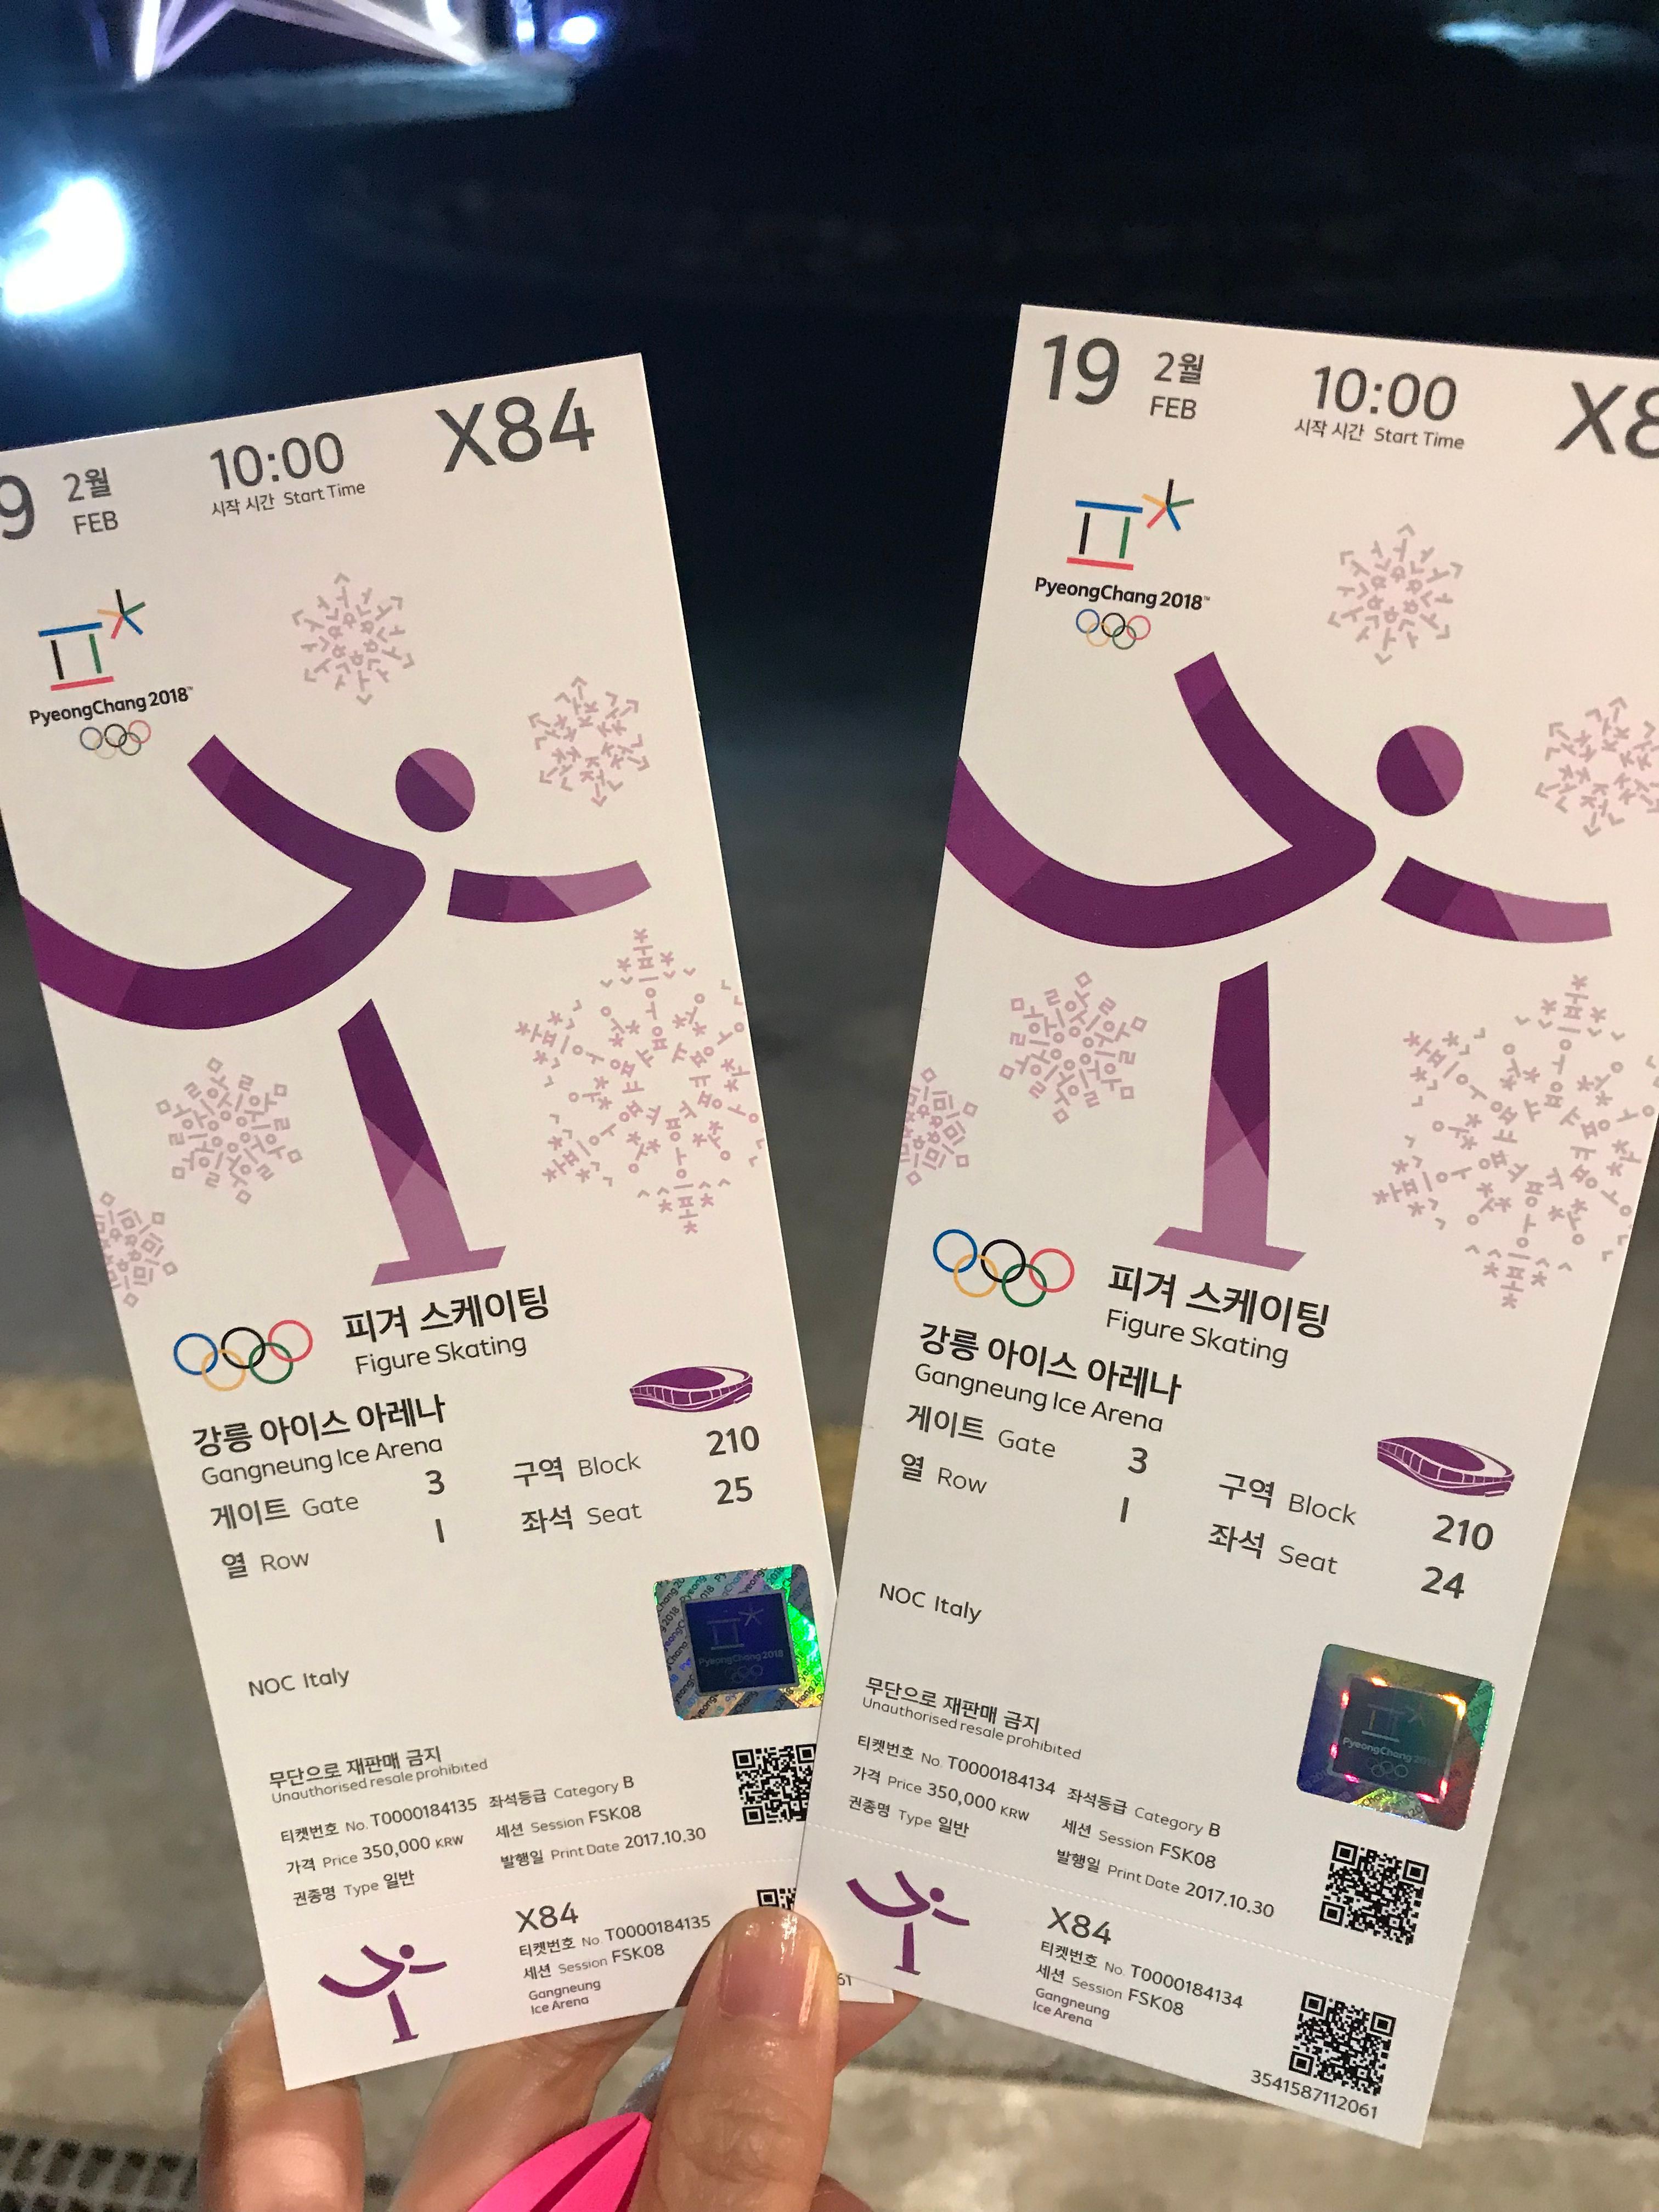 I went to the Pyeongchang Olympic Gangneung Ice Arena!